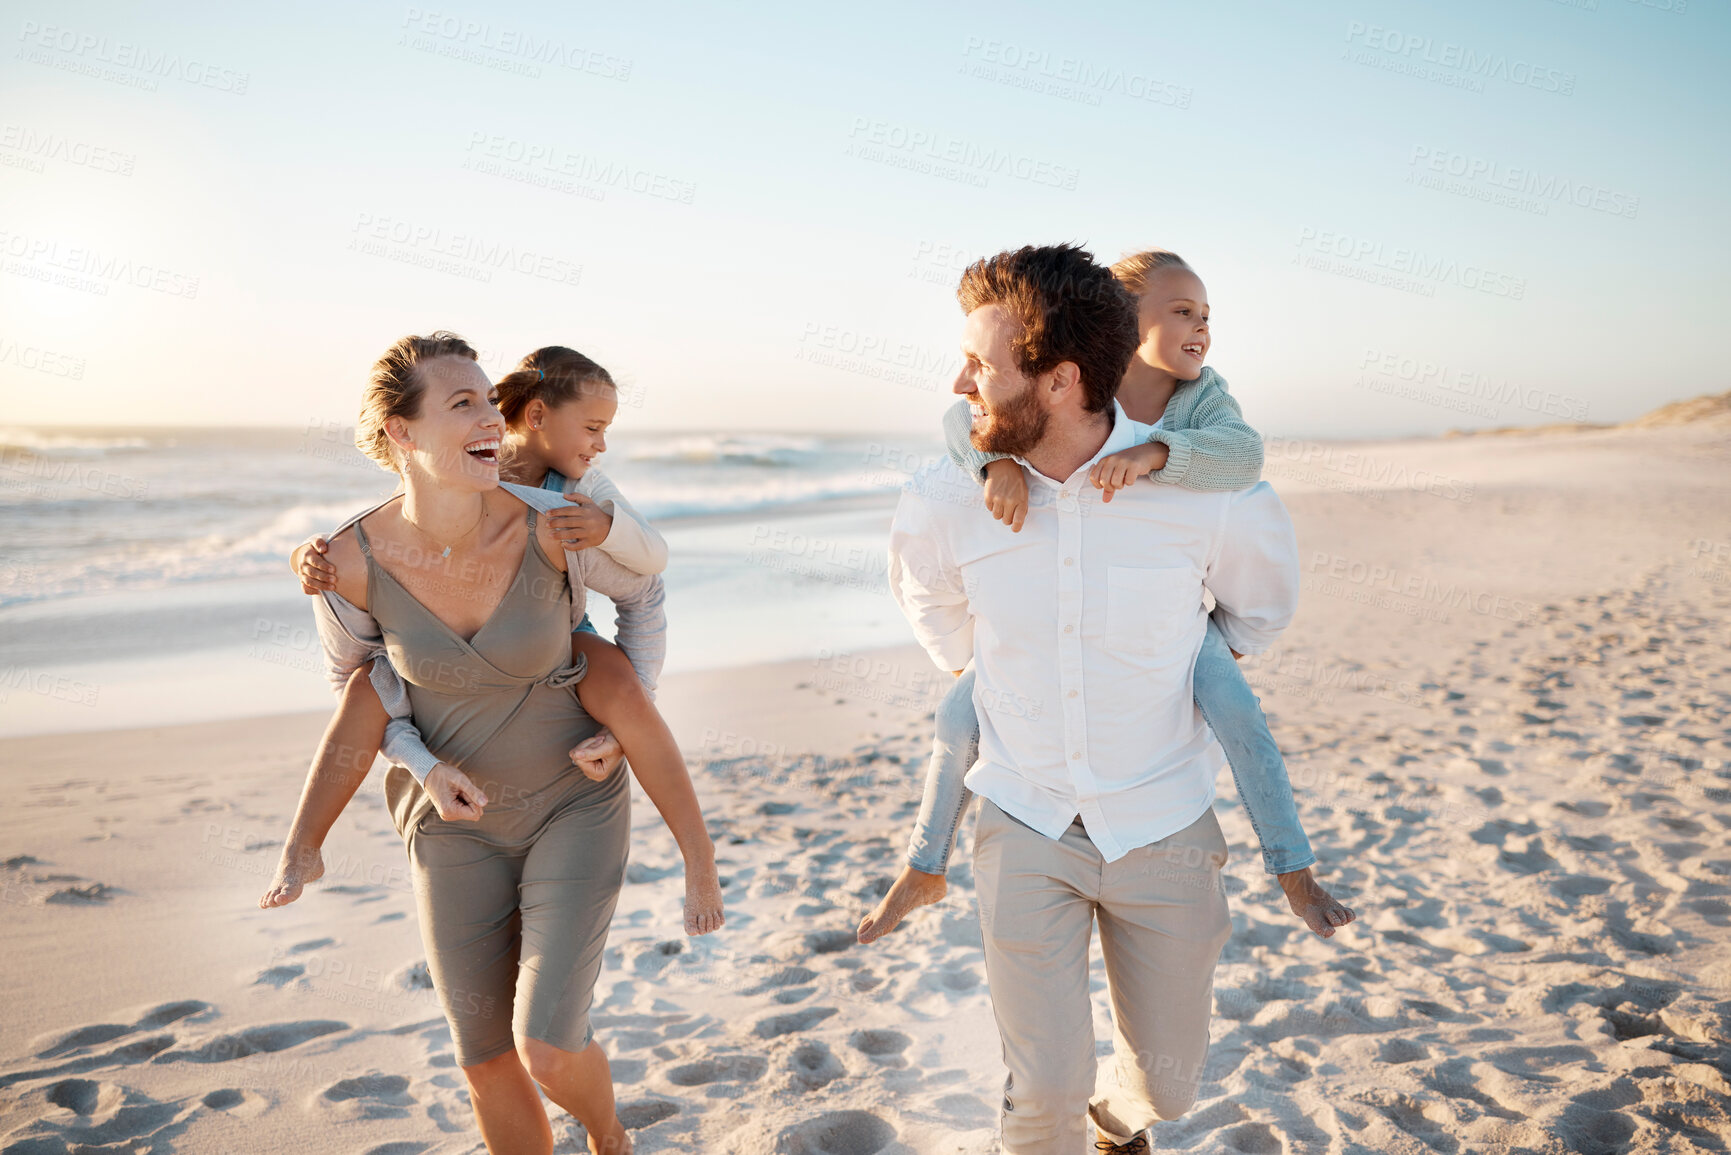 Buy stock photo Playful parents enjoying a holiday with their children. Little girls getting piggyback rides from their parents. Carefree family on holiday by the beach together. Family bonding by the ocean